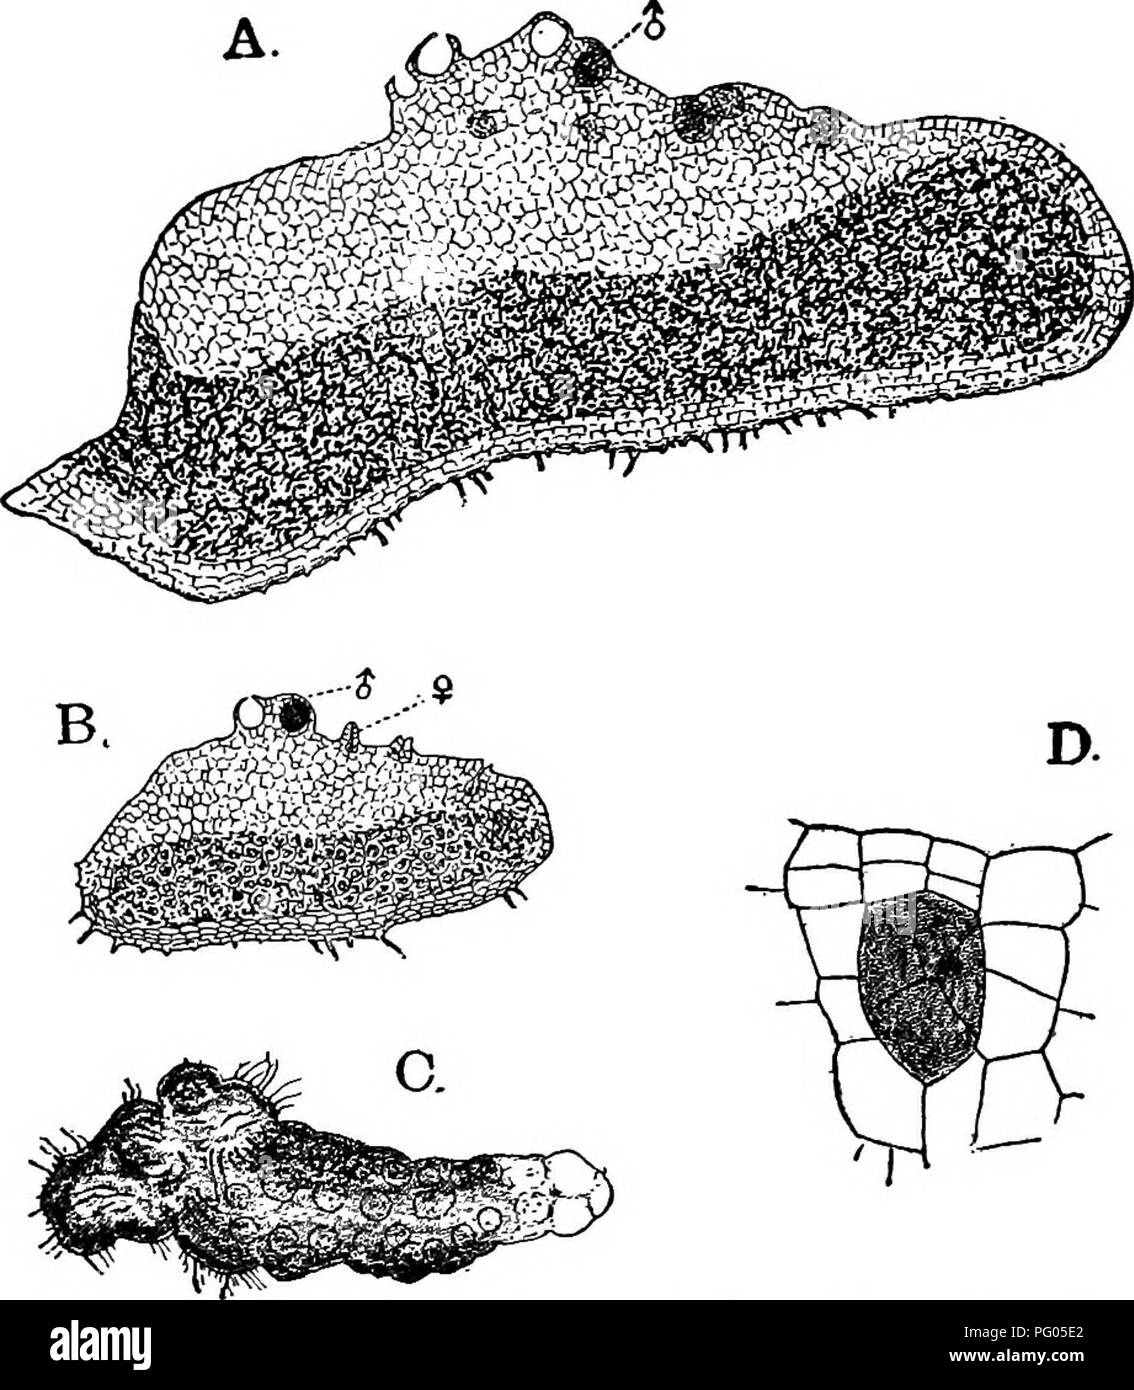 . The structure and development of mosses and ferns (Archegoniatae). Plant morphology; Mosses; Ferns. VII PTERIDOPHYTA—FILICINE^—OPHIOGLOSSACEJE 237 from which the cover of the antheridium is formed. The outer wall of the antheridium remains for the most part but one cell thick, in tljis respect more resembling Marattia than it does Botrychium. The antheridium also opens by a single, nearly triangular opercular cell (Fig. 125, E), as it does in Marattia. The spermatozoids were not seen, but probably resemble those of Botrychium or Marattia. The first division of the young archegonium is the sa Stock Photo